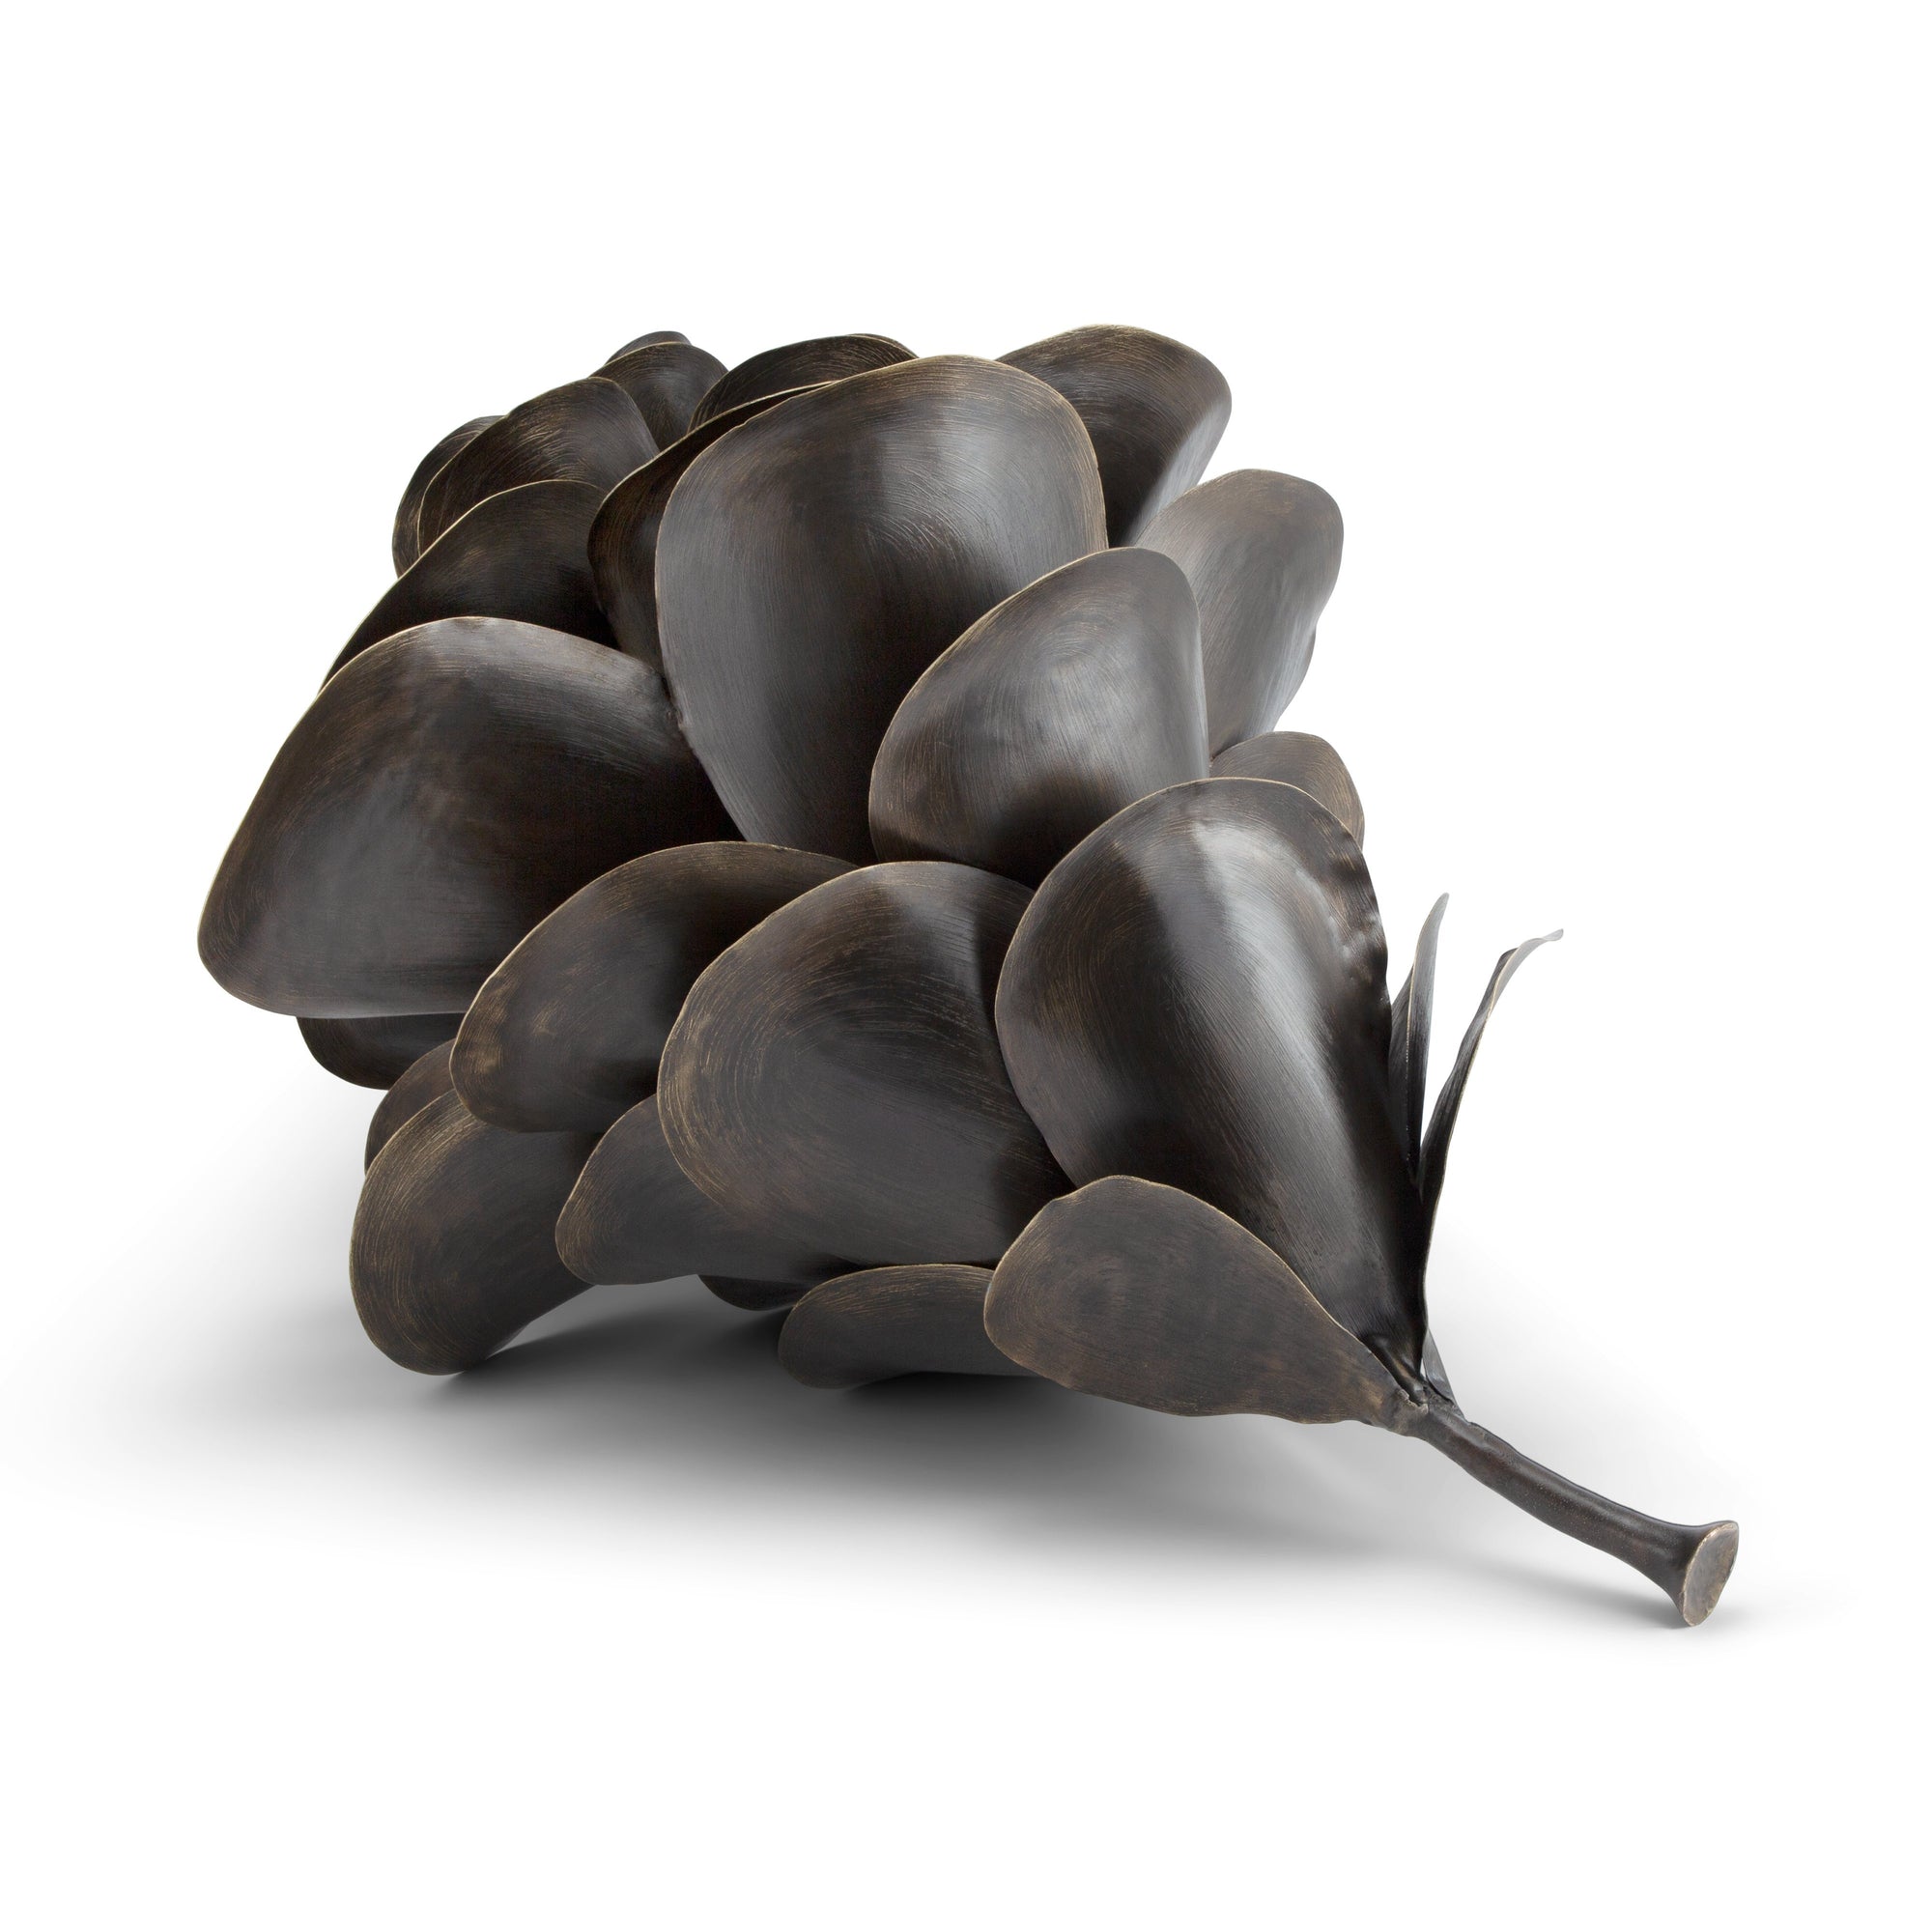 Michael Aram Pine Cone Object (Limited Edition of 500)